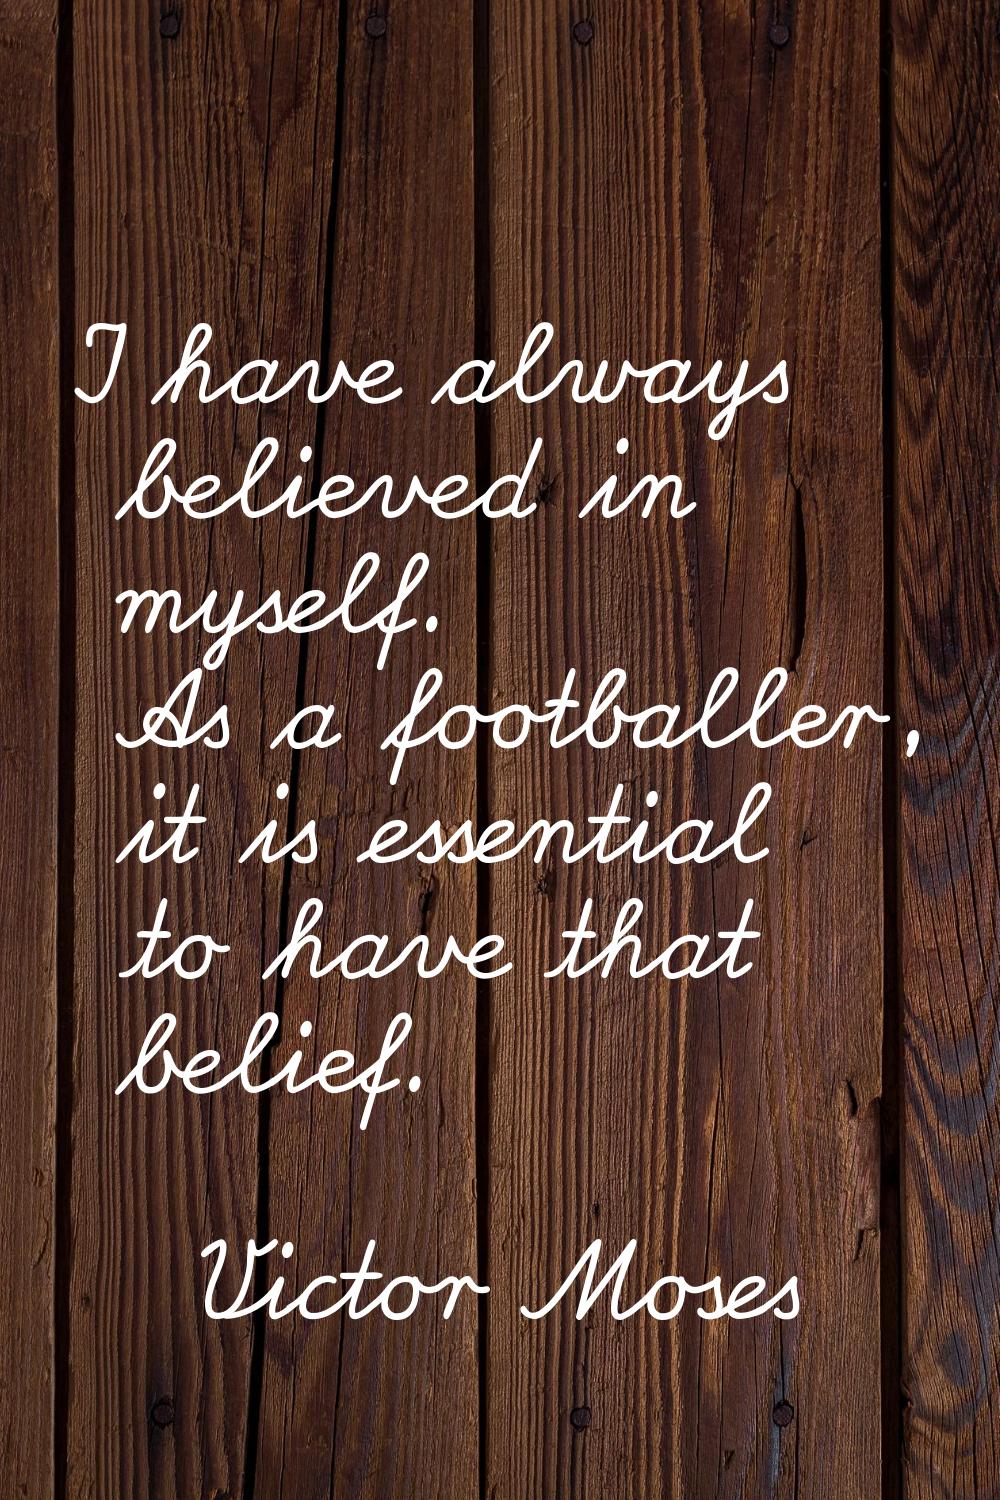 I have always believed in myself. As a footballer, it is essential to have that belief.